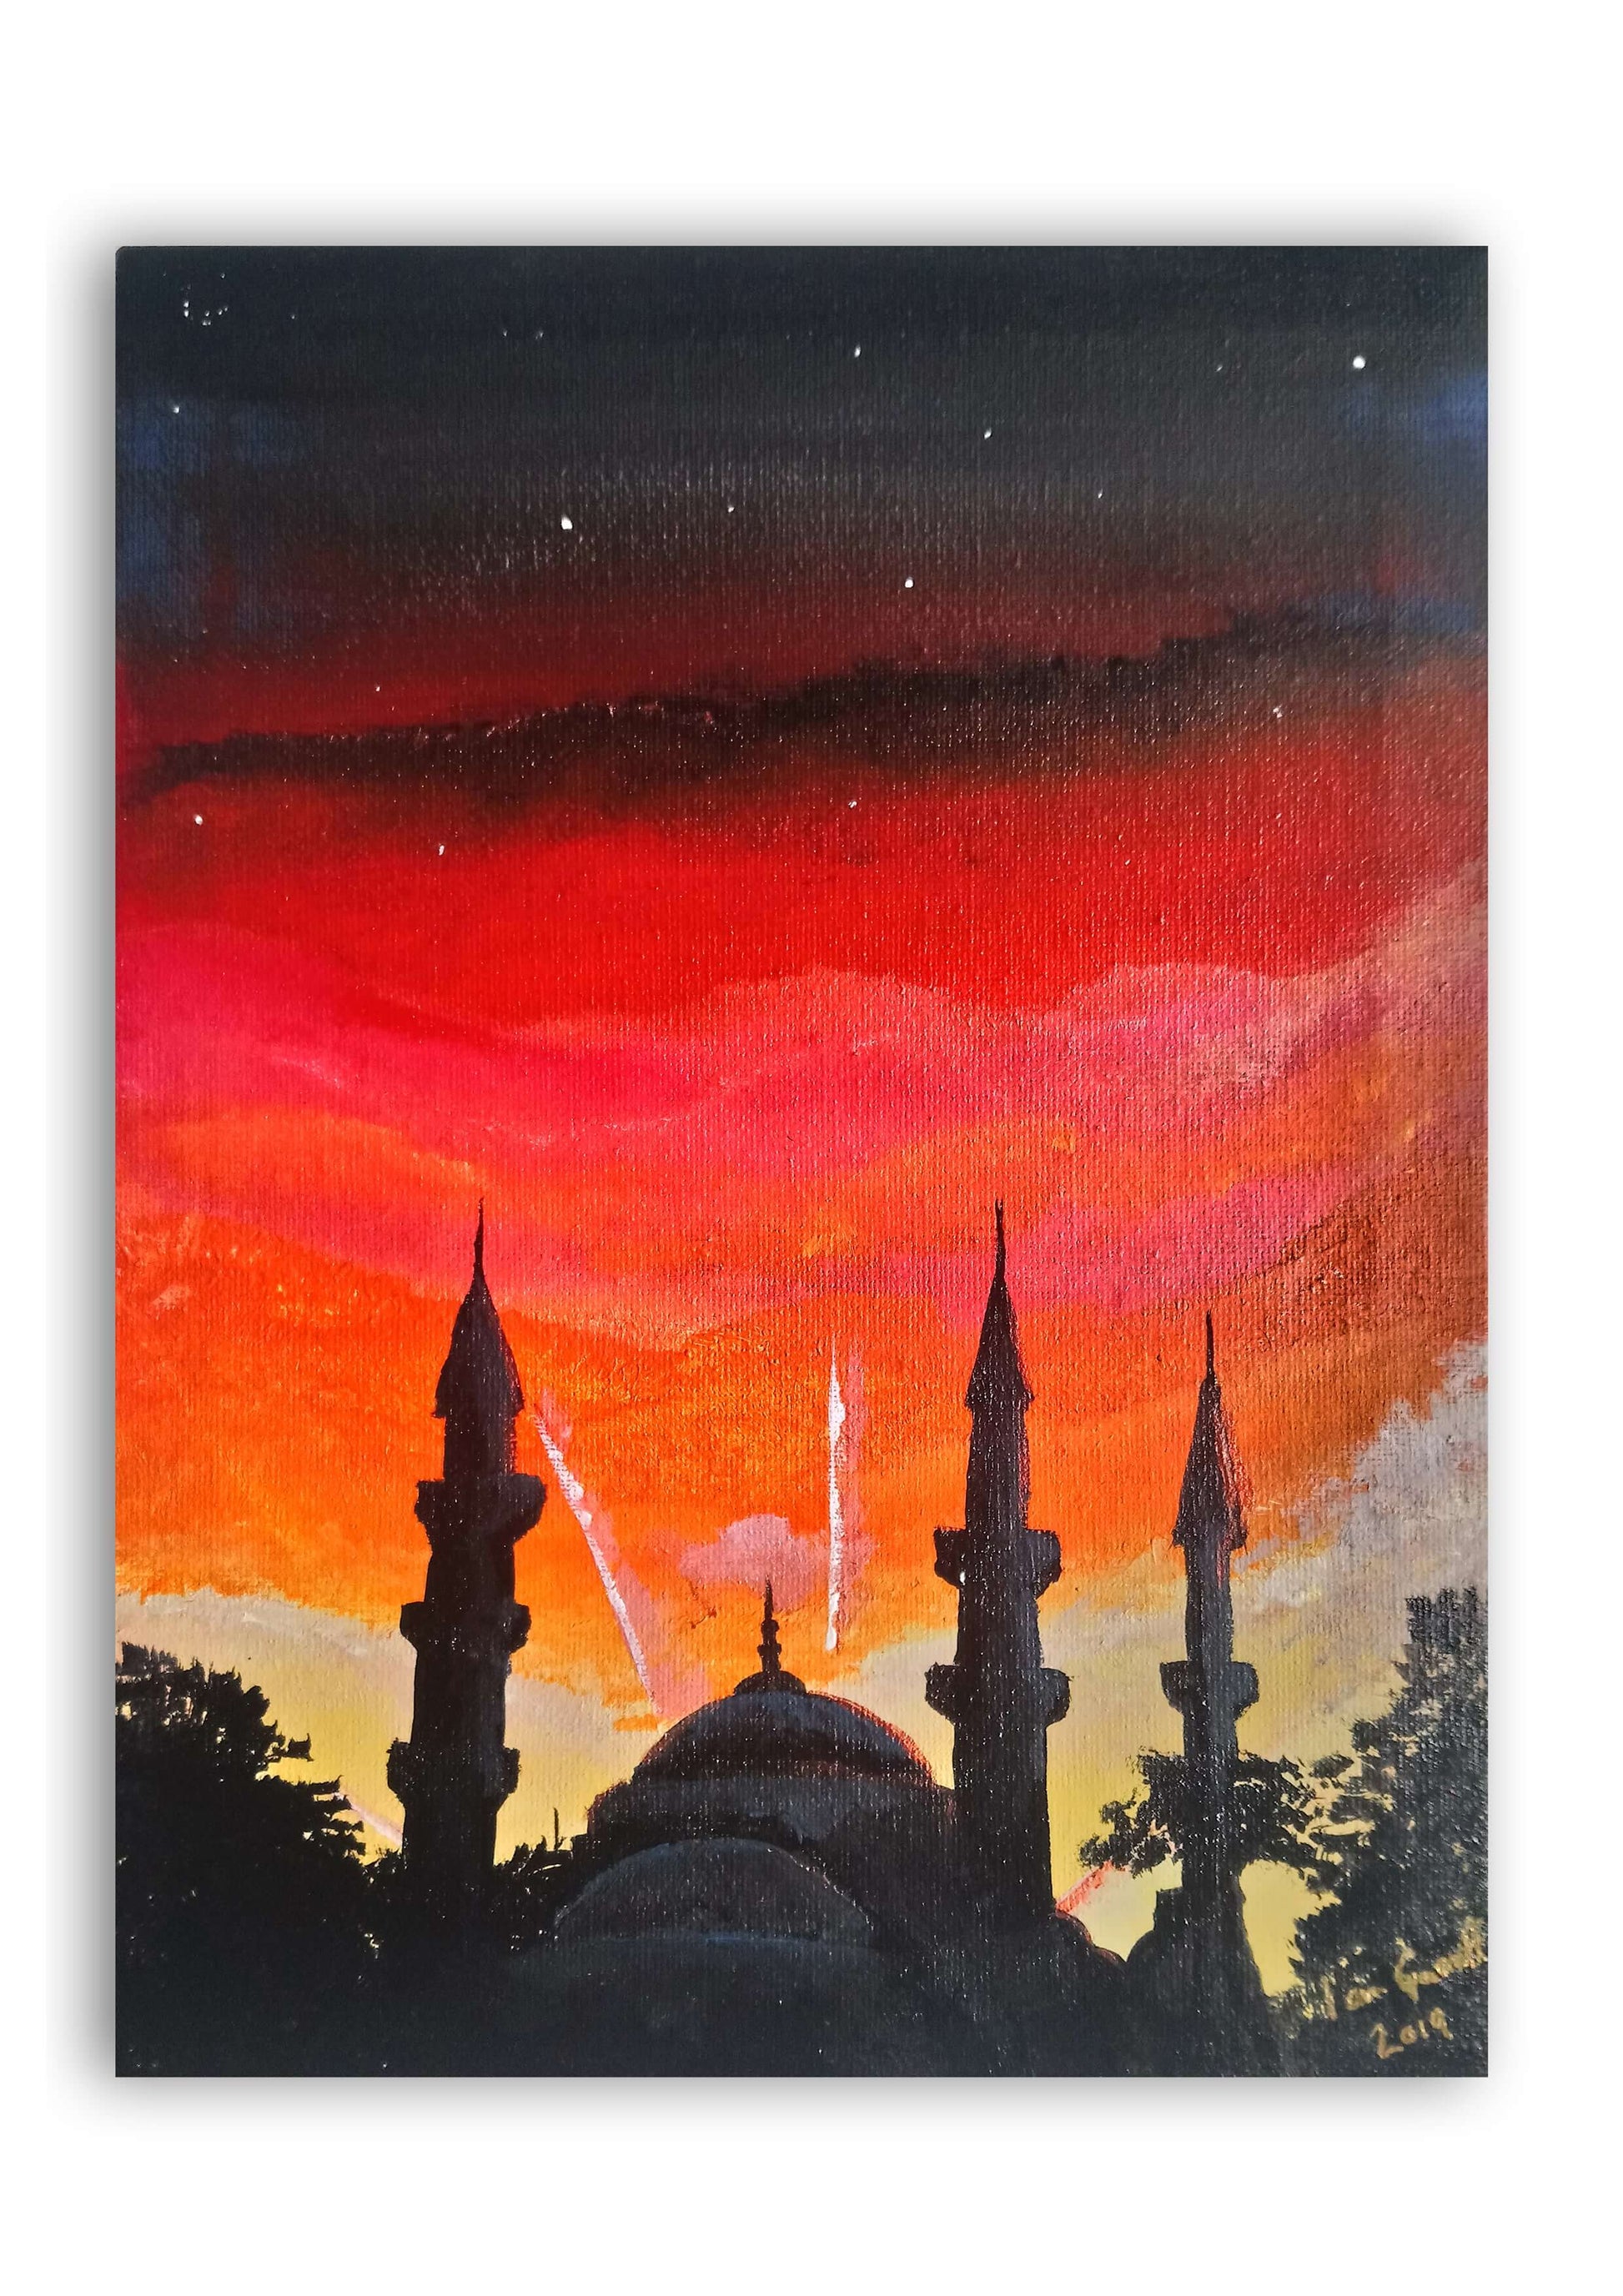 Sunset over the Blue Mosque, ©Ian Garrett 2019. Acrylic on Canvas 9 x 12 inches.